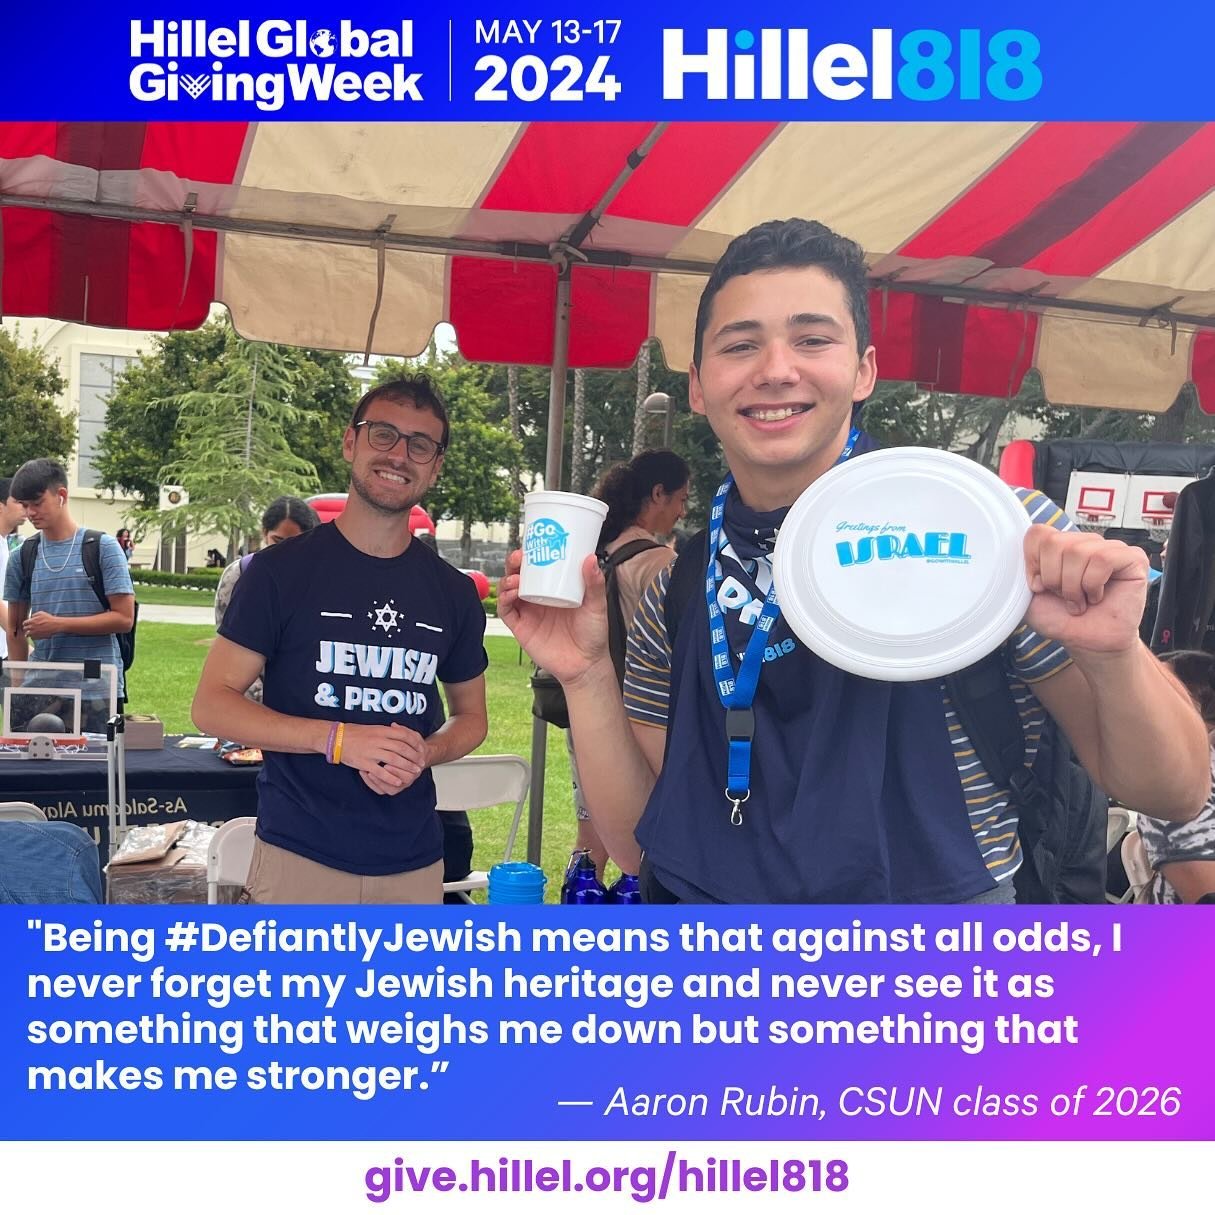 To say it&rsquo;s been challenging to be Jewish on campus these last few months would be an understatement, but our incredible students have persevered. They have shown us through their actions what being #DefiantlyJewish is and to never shy away fro